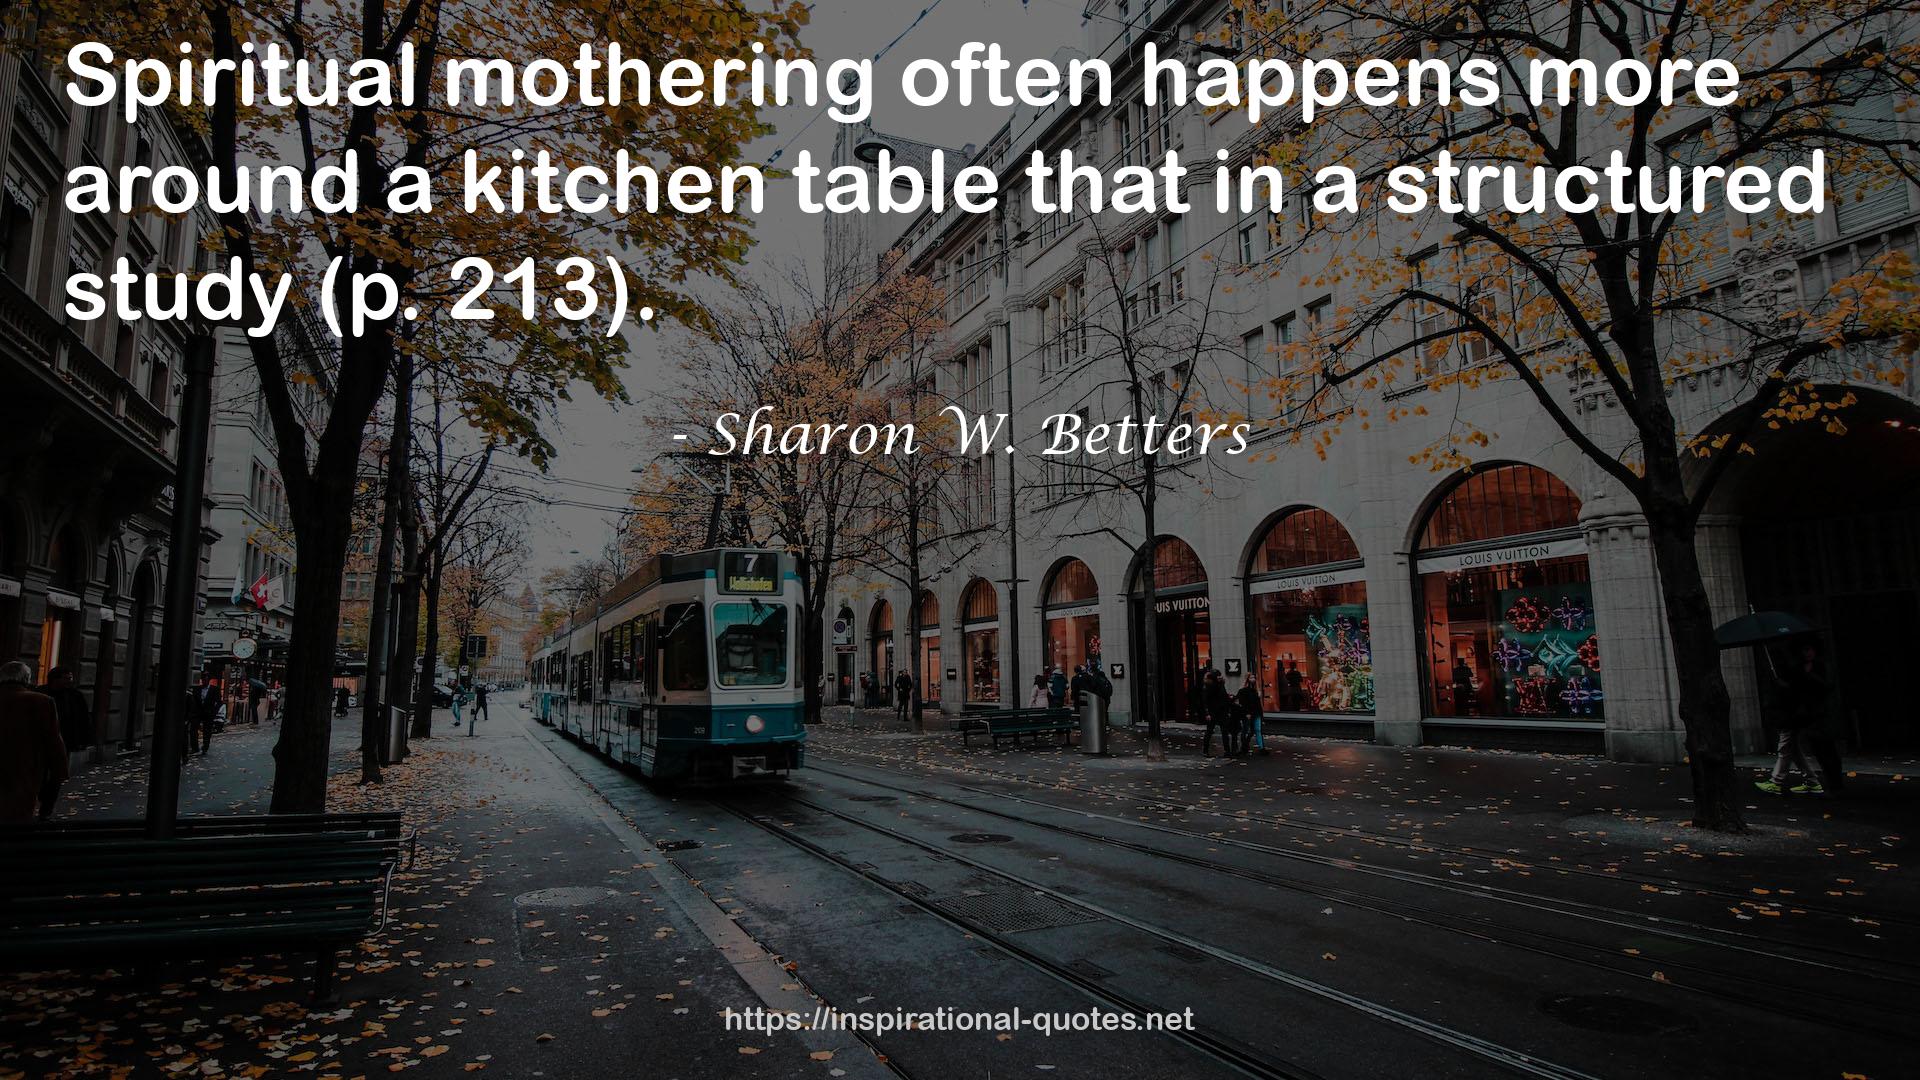 Sharon W. Betters QUOTES